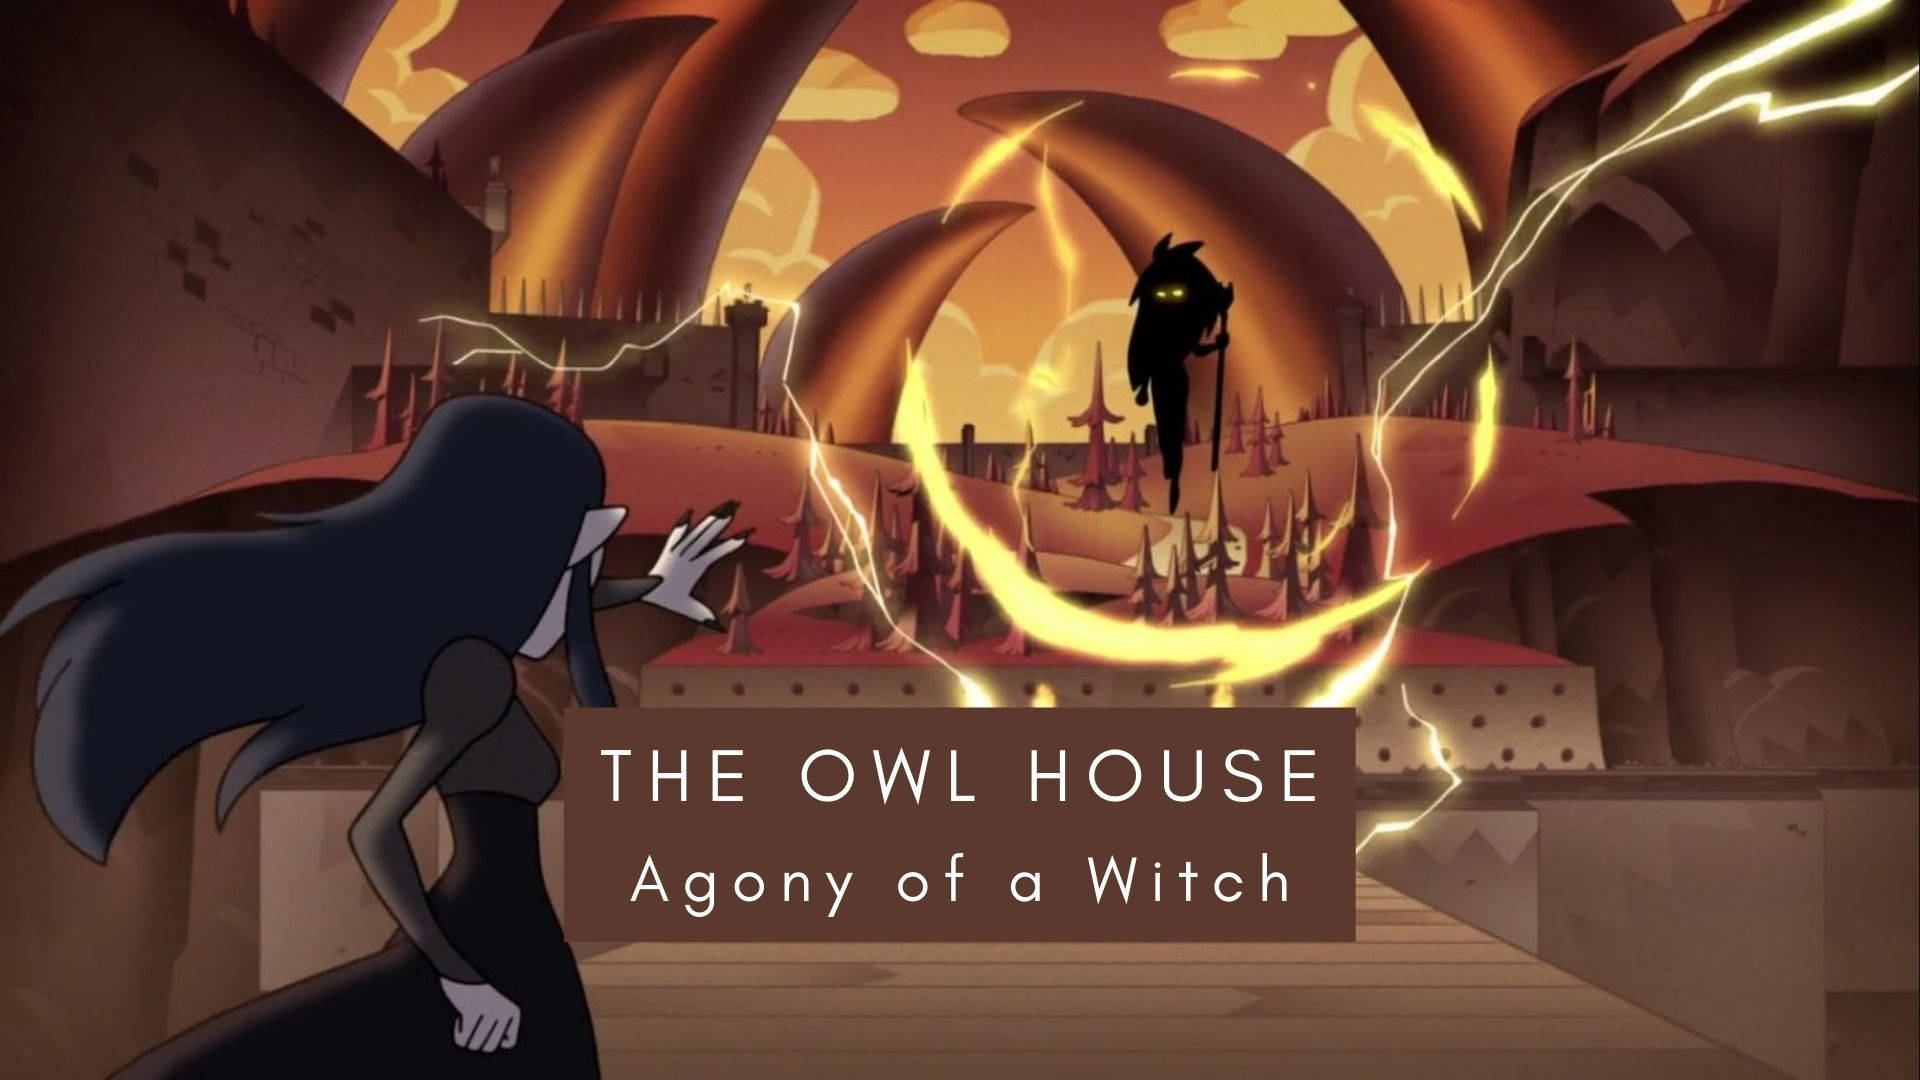 Eda And Luz Locked In Battle During The Agony Of A Witch Episode In The Owl House Background